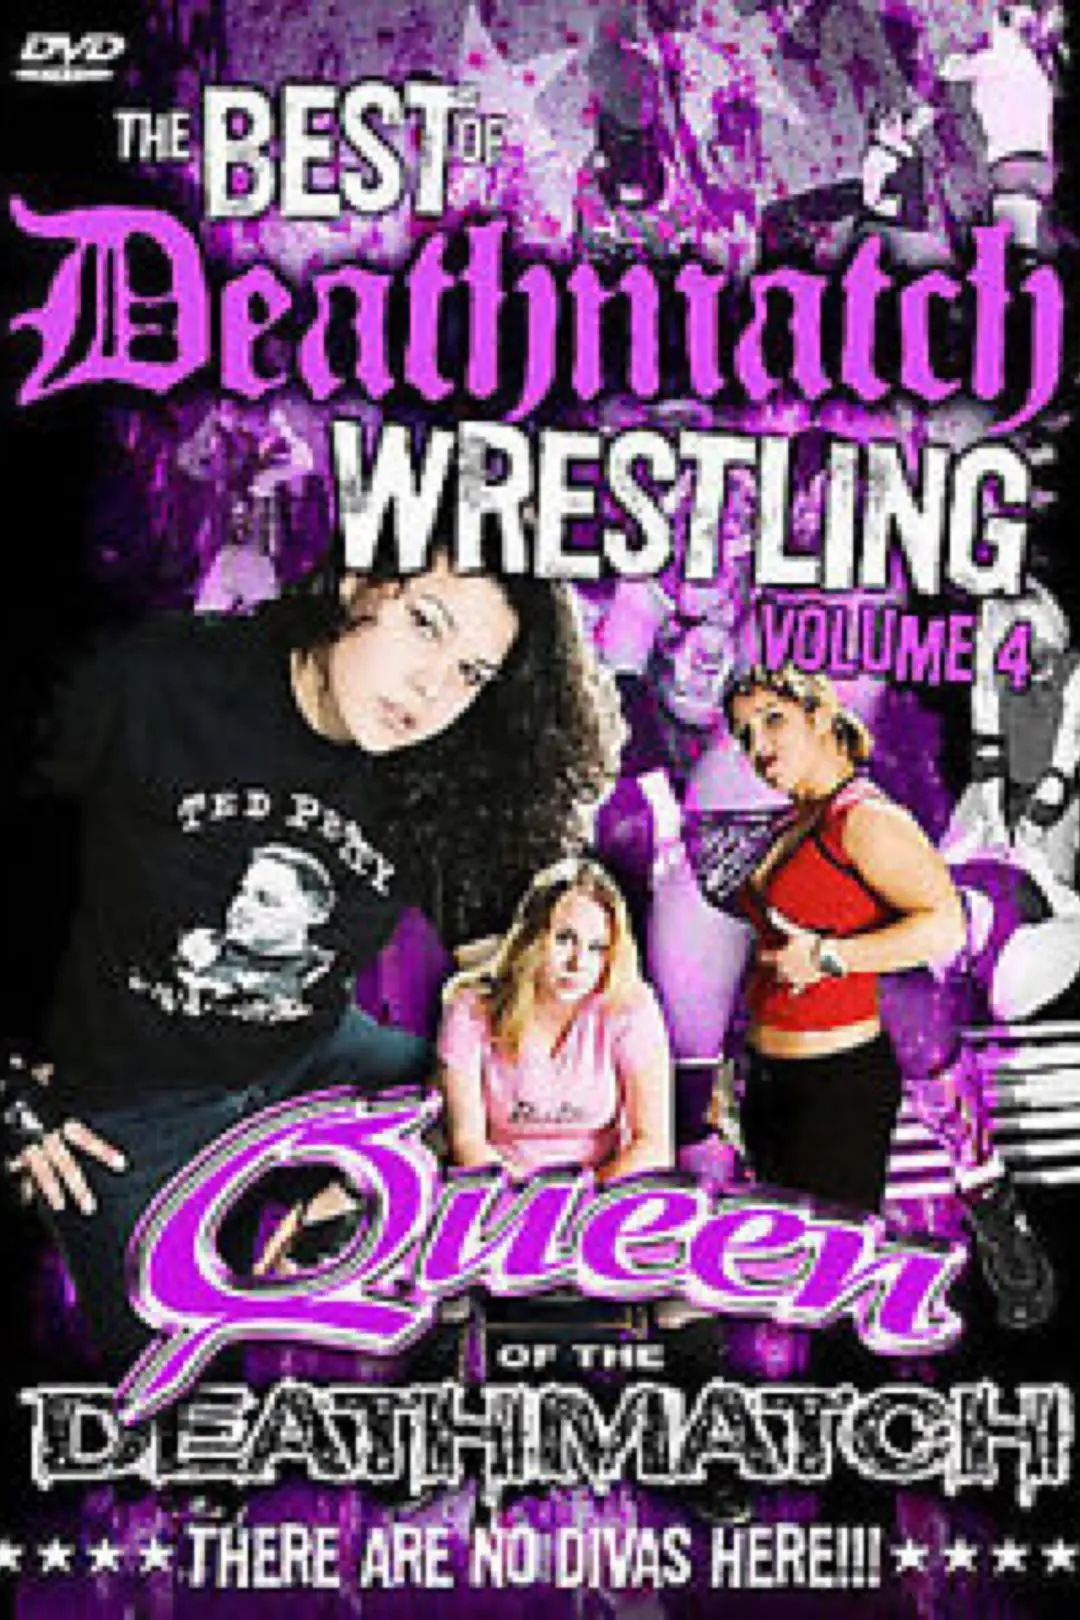 The Best of Deathmatch Wrestling, Vol. 4: Queens of the Deathmatch_peliplat